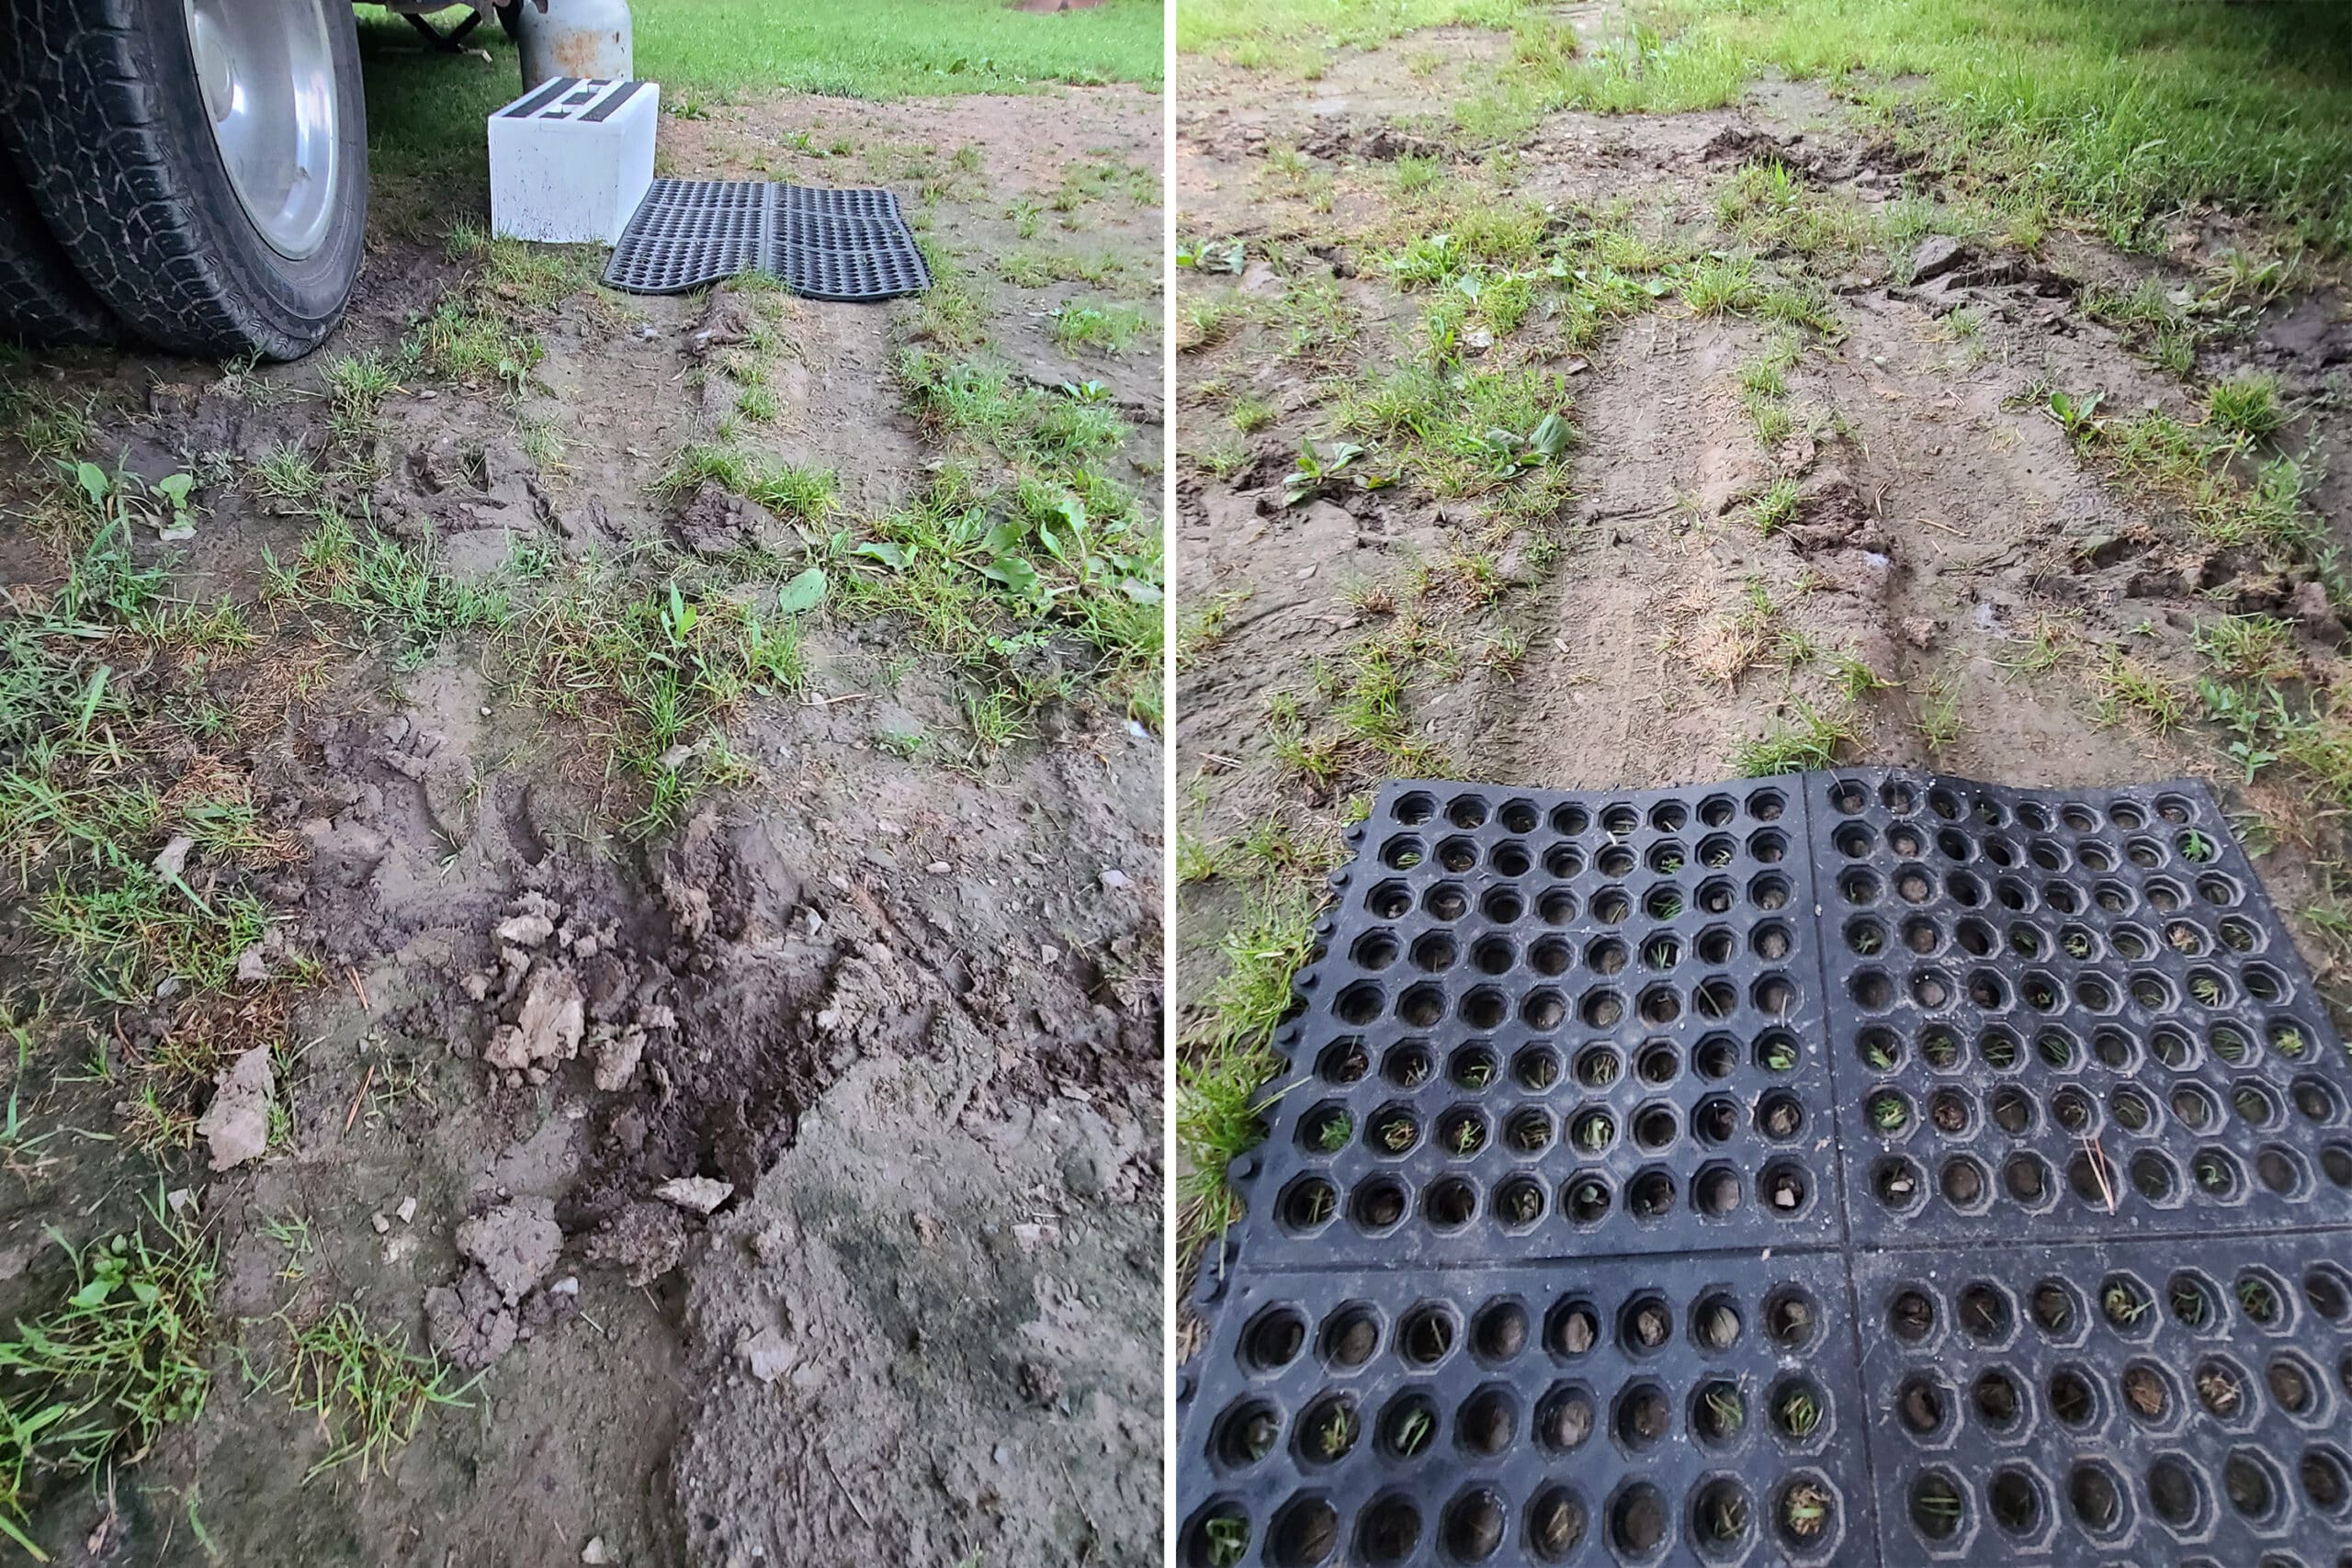 Side by side images showing deep, dried ruts in mud at a Selkirk Provincial Park camp site.